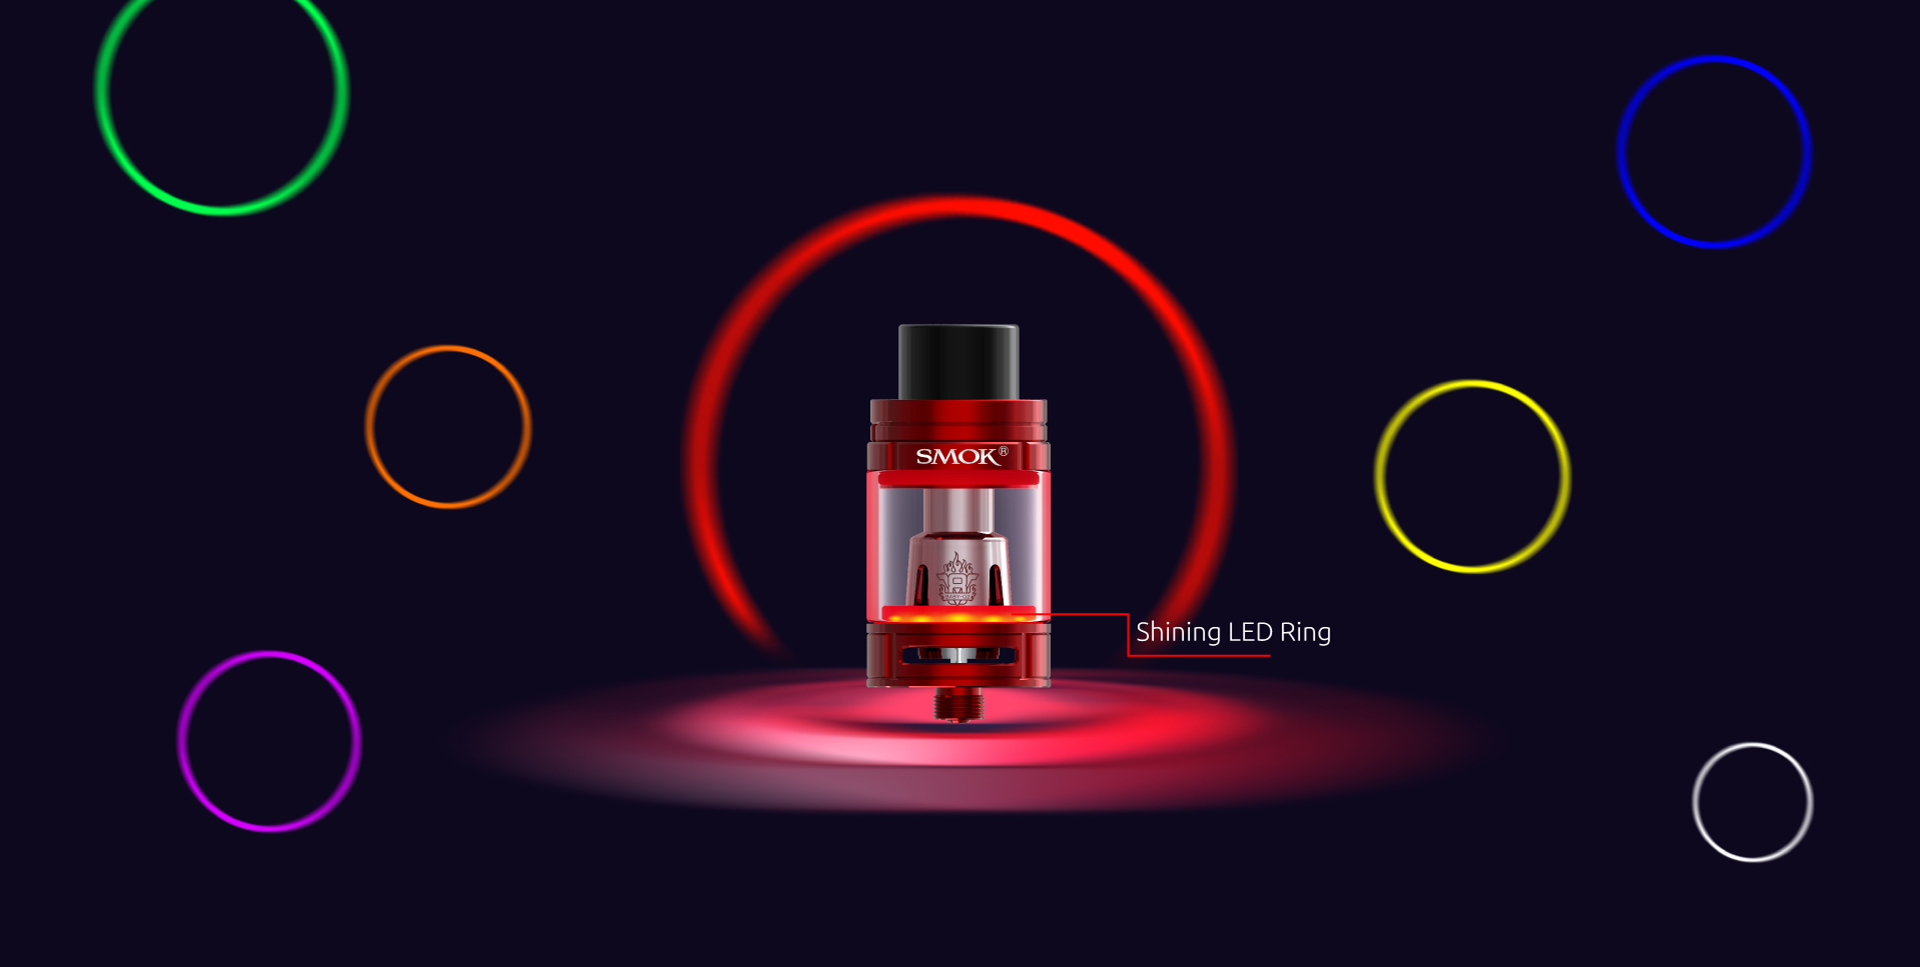 TFV8 Big Baby Light Edition - SMOK® Innovation Keeps Changing the Vaping Experience